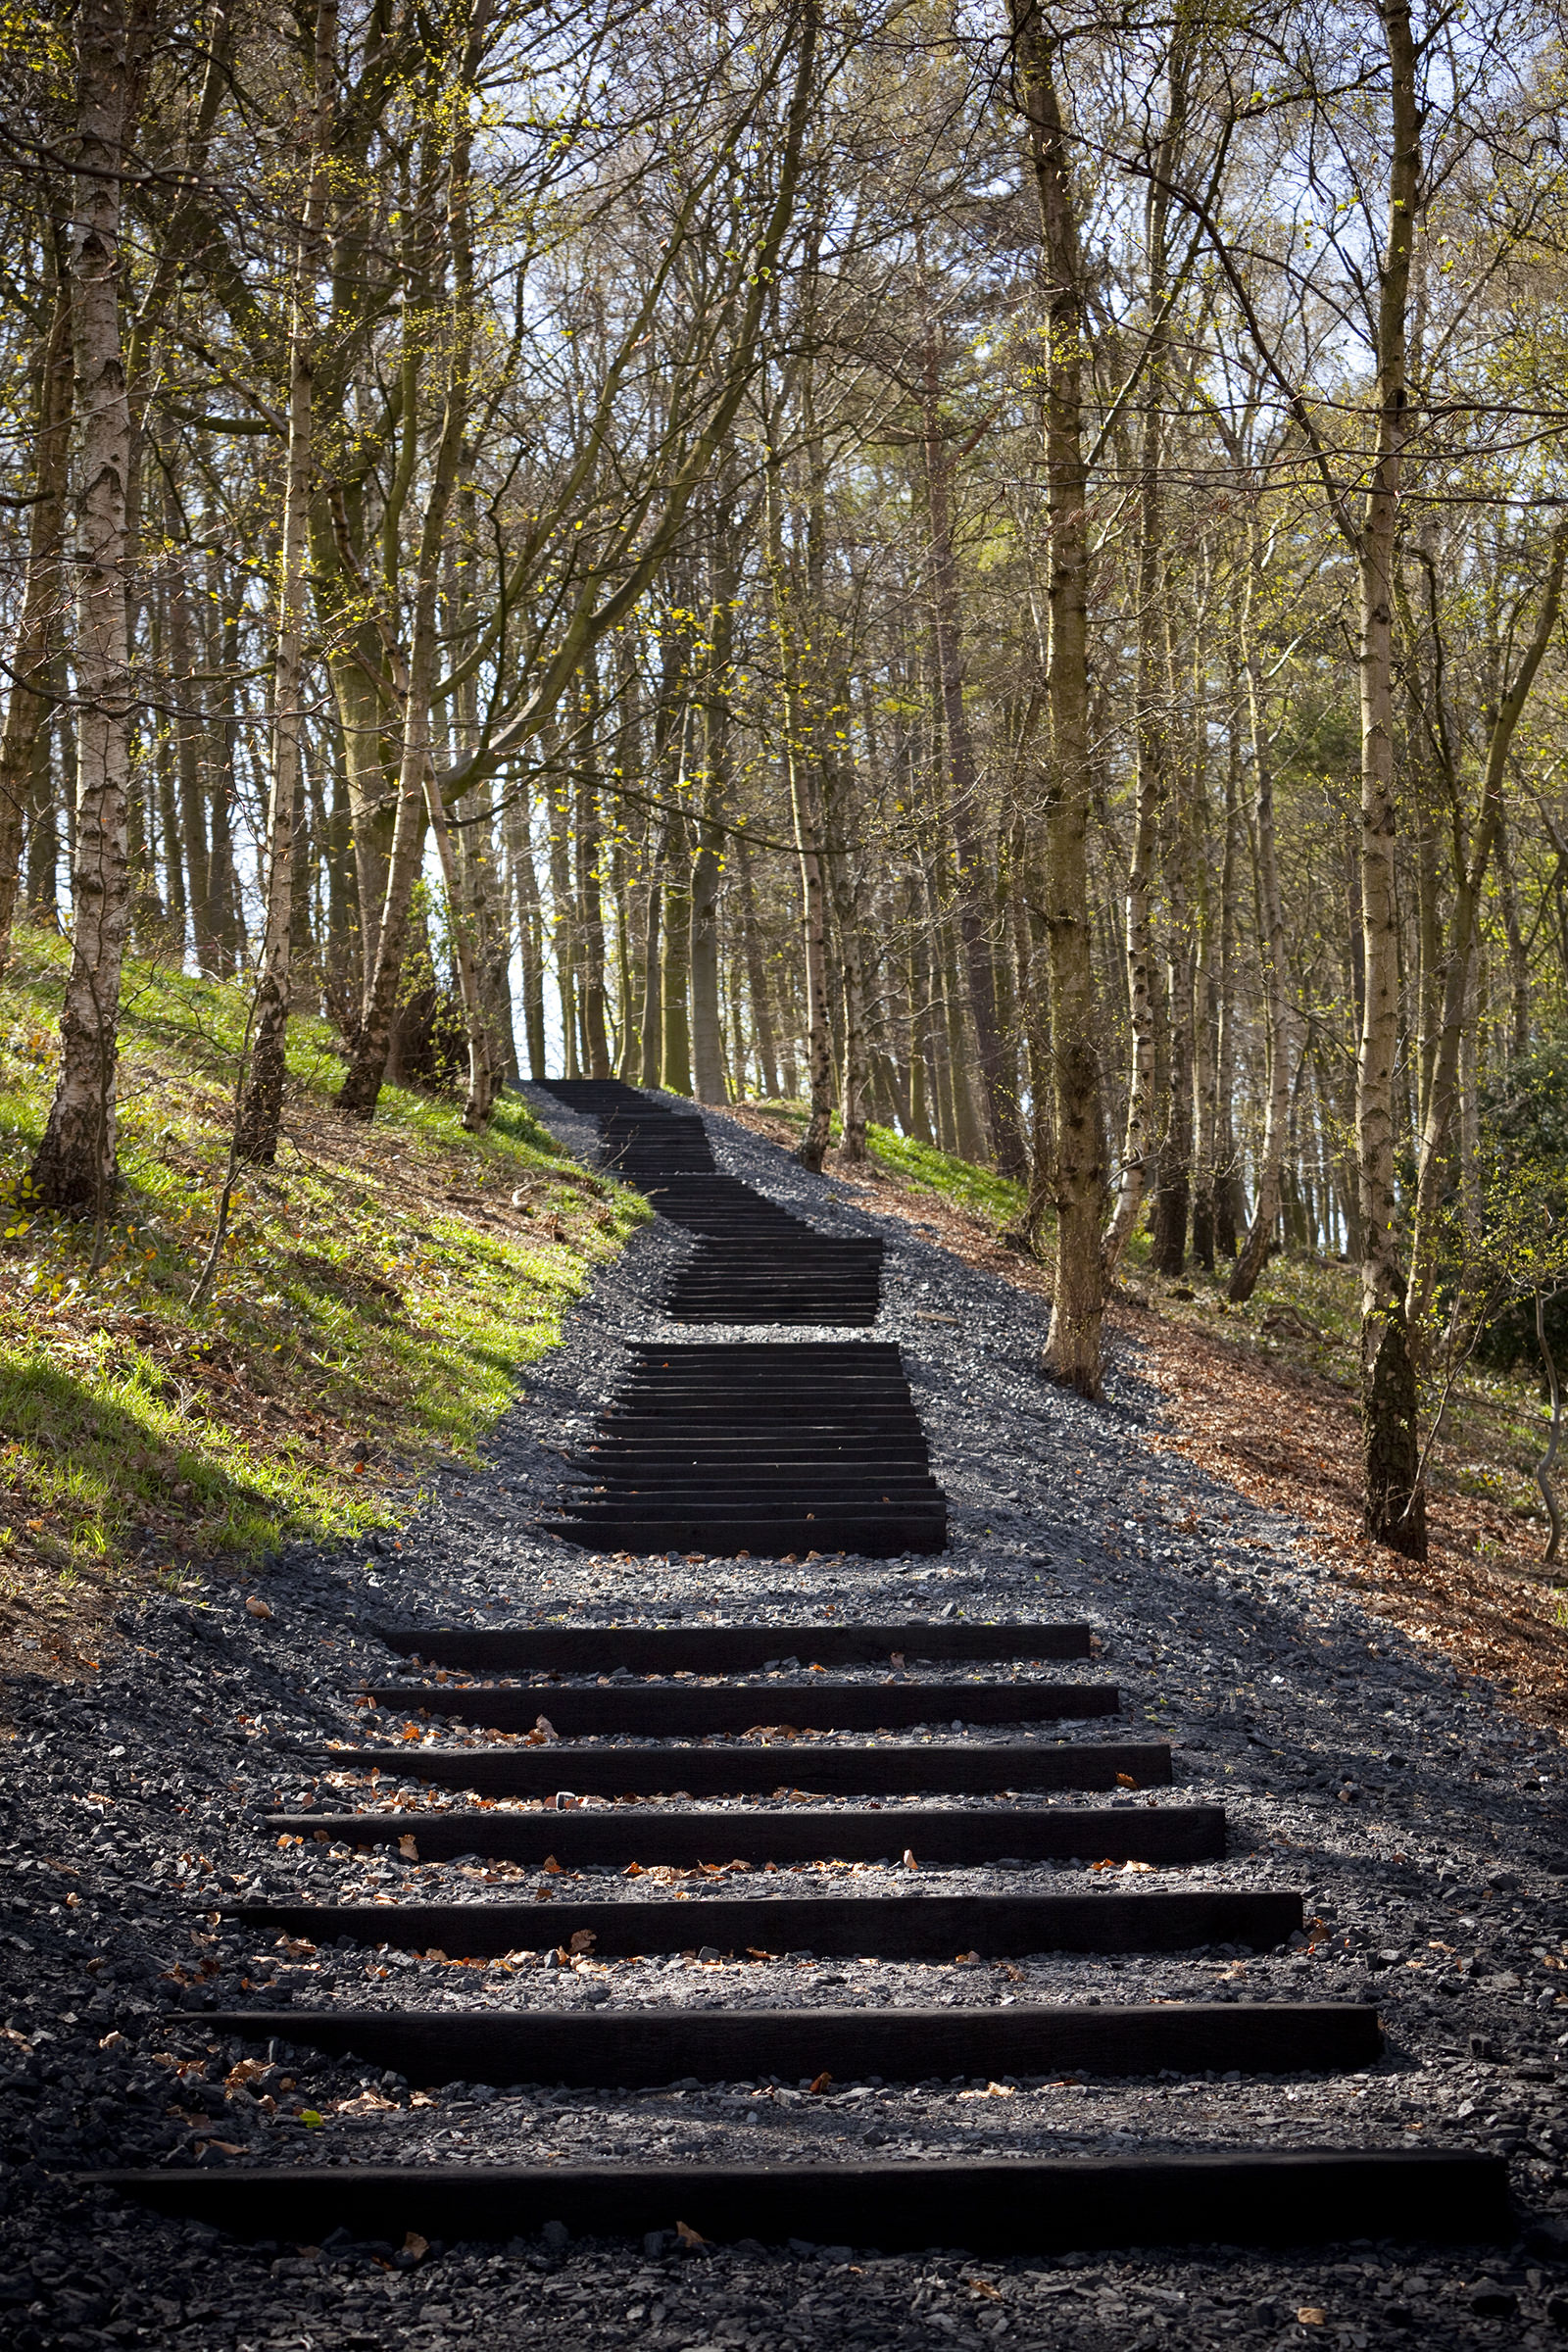 A series of wooden steps cut into a hillside. Trees are in the background.